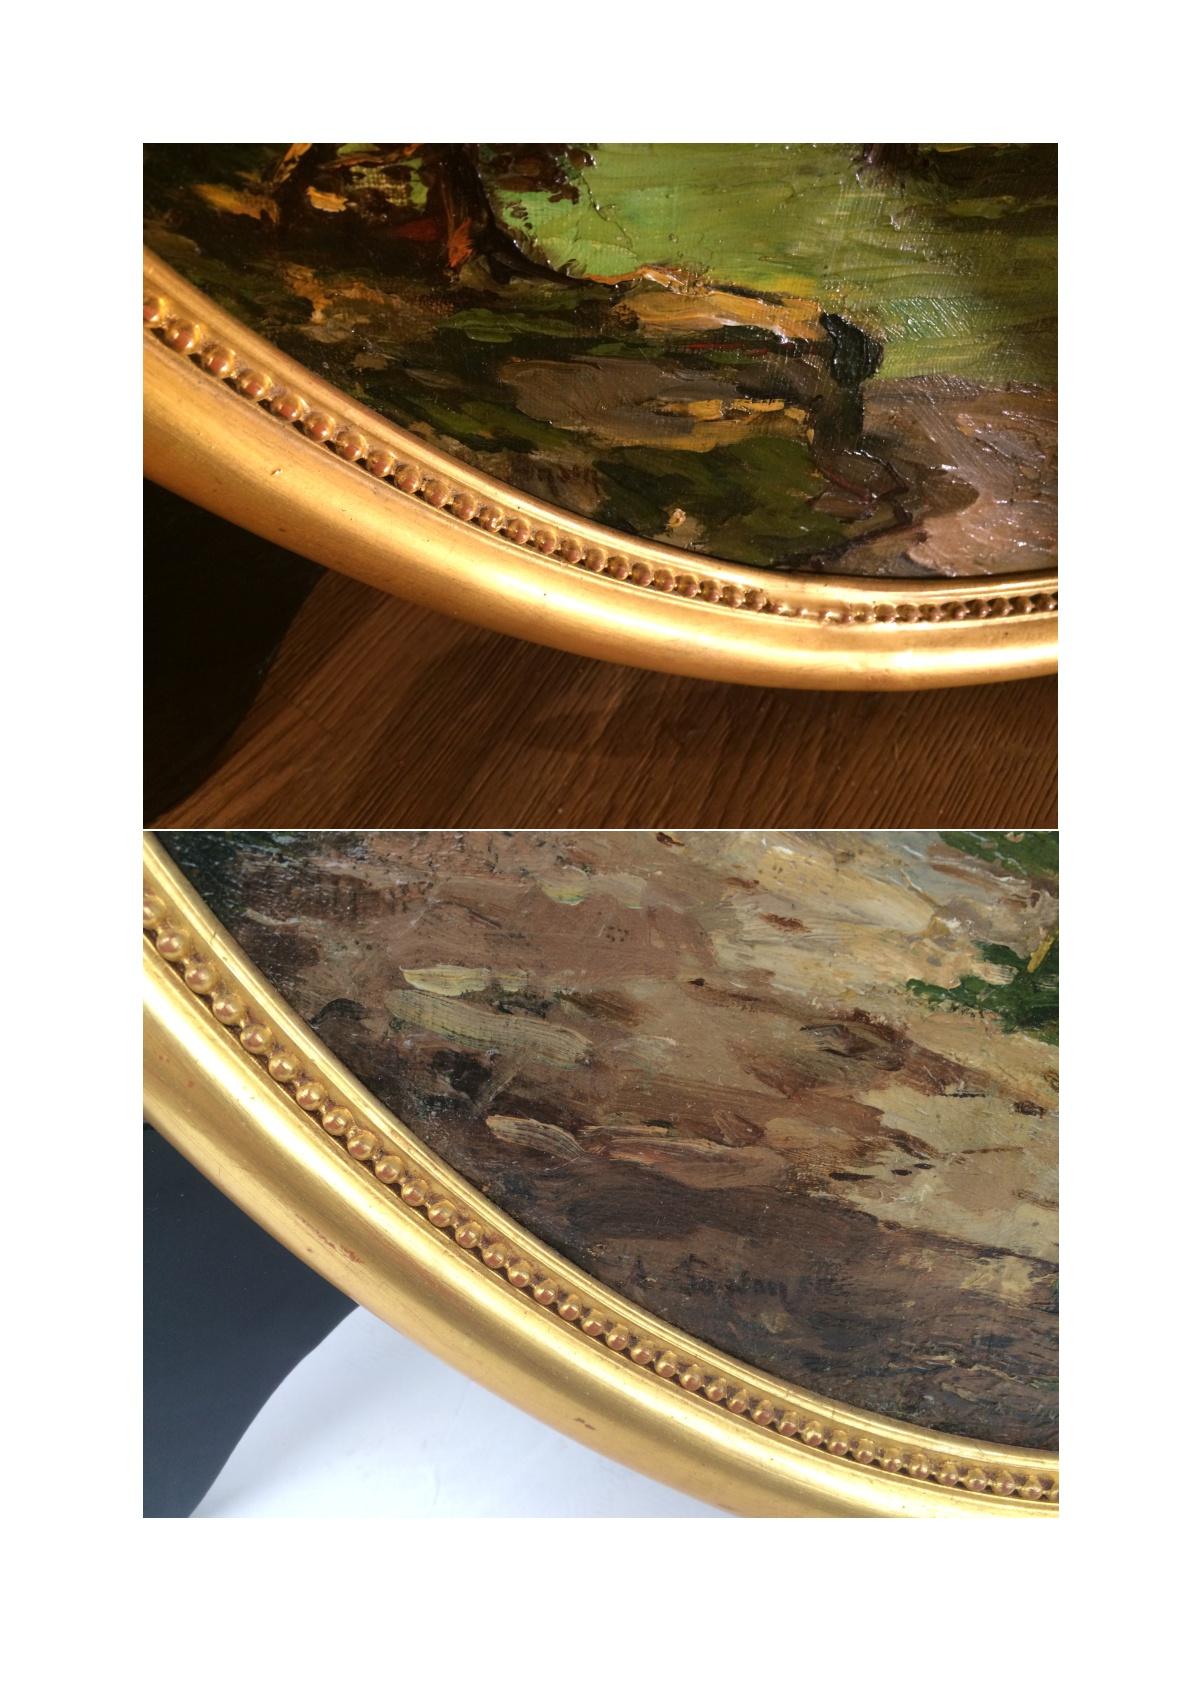 PONSON Etienne Aimé (1850-1924)
French Provence Mediterenean Landscape
Oils on canvas in Pair signed low
Old frames gilded with leaves
Dim canvas (each) : 54 X 46 cm
Dim frame (each) : 60 X 52 cm

PONSON Etienne Aimé (1850-1924)
French painter 19th